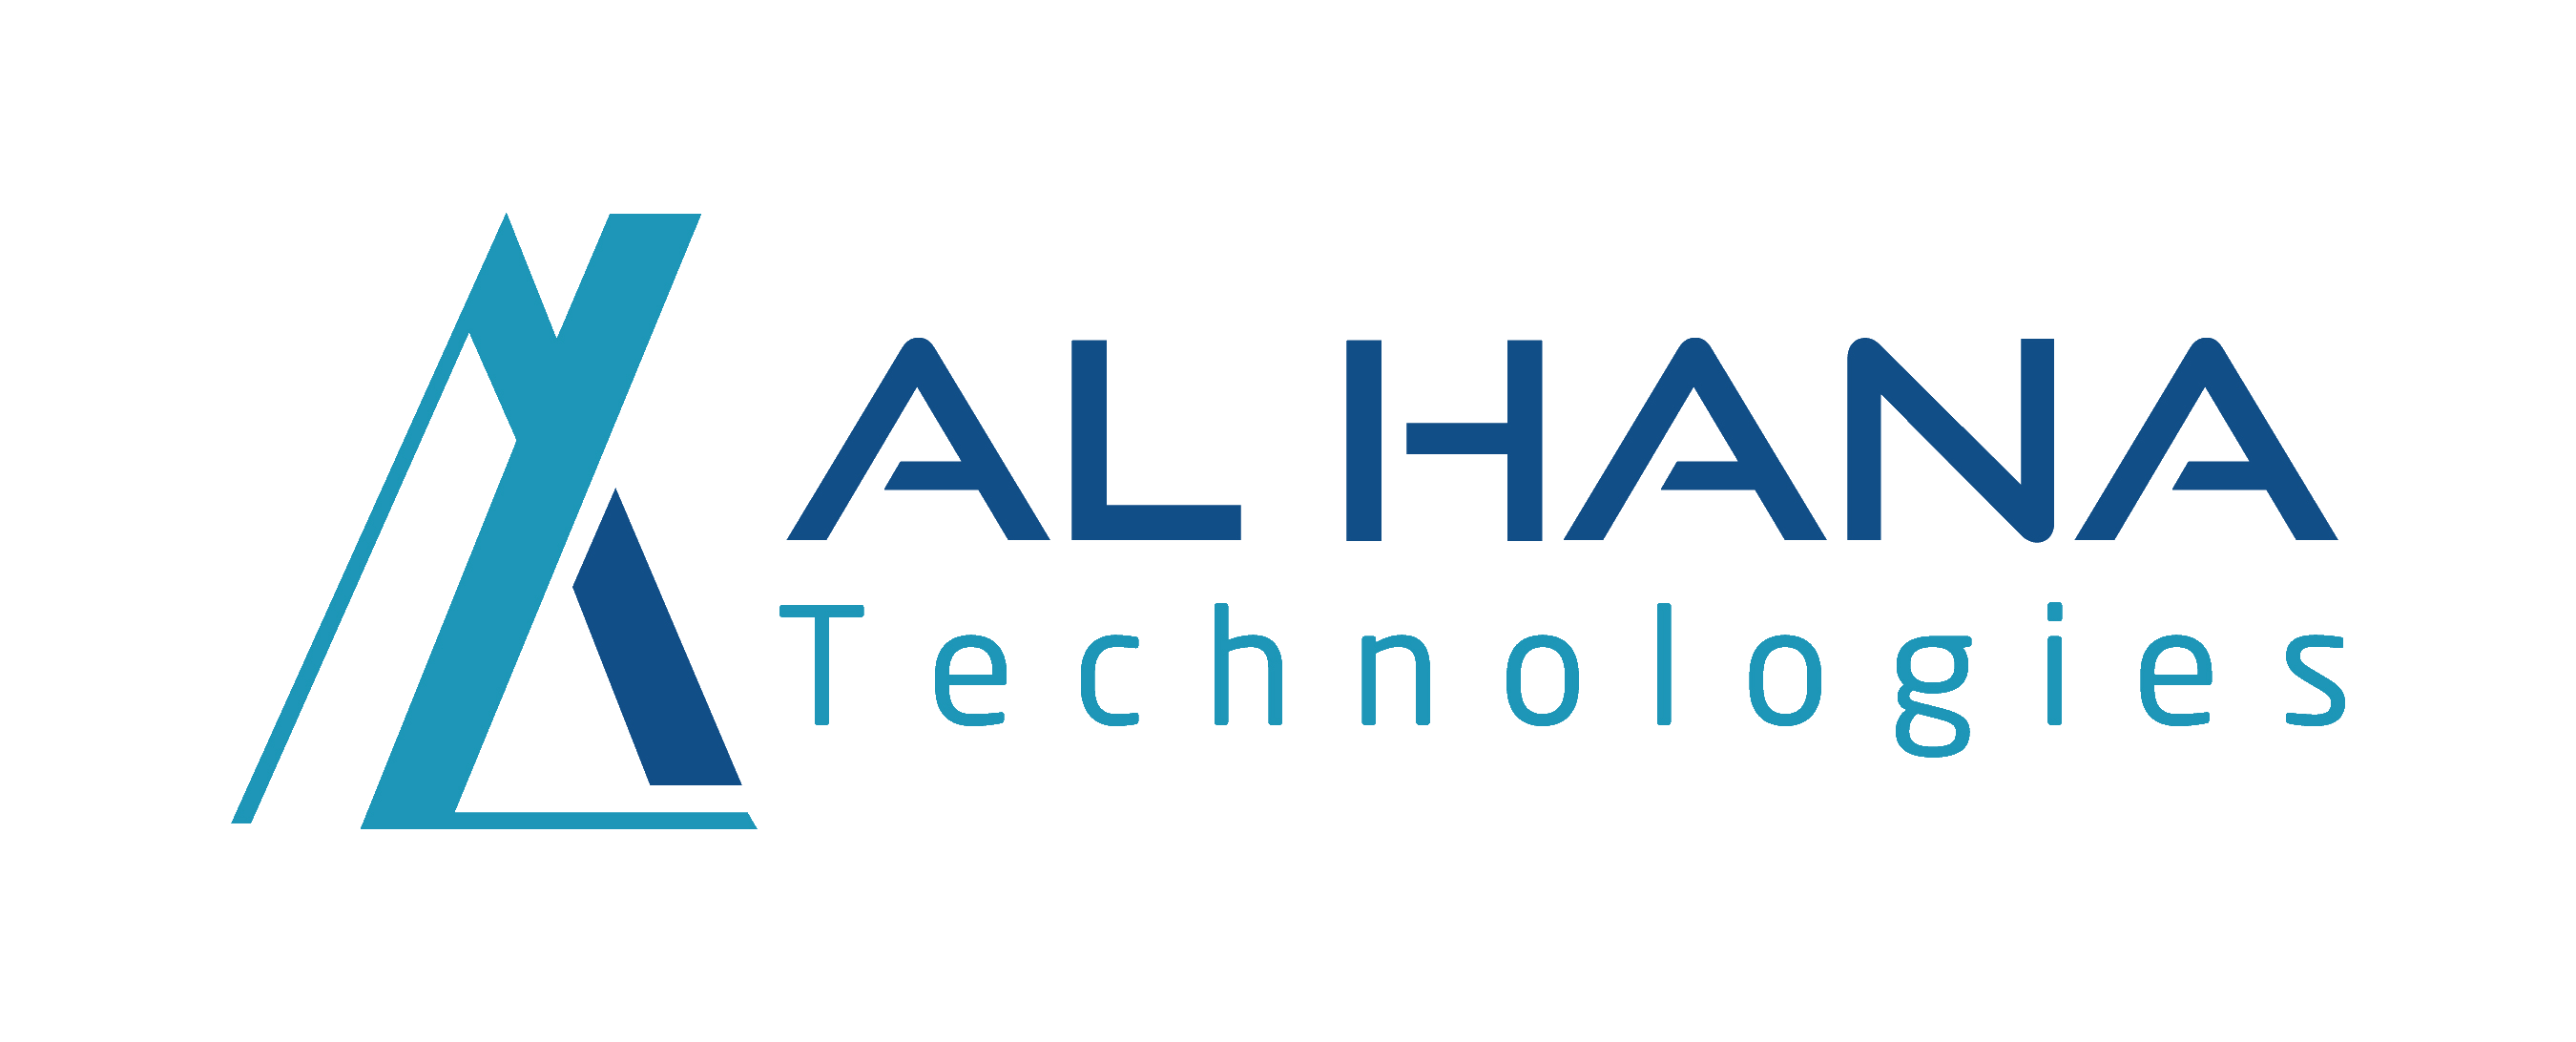 alhana technologies,Cabling,Networking,Security System,Panduit,Systimax,hikvision,cisco,salto,data,telephone,cctv,dataceter